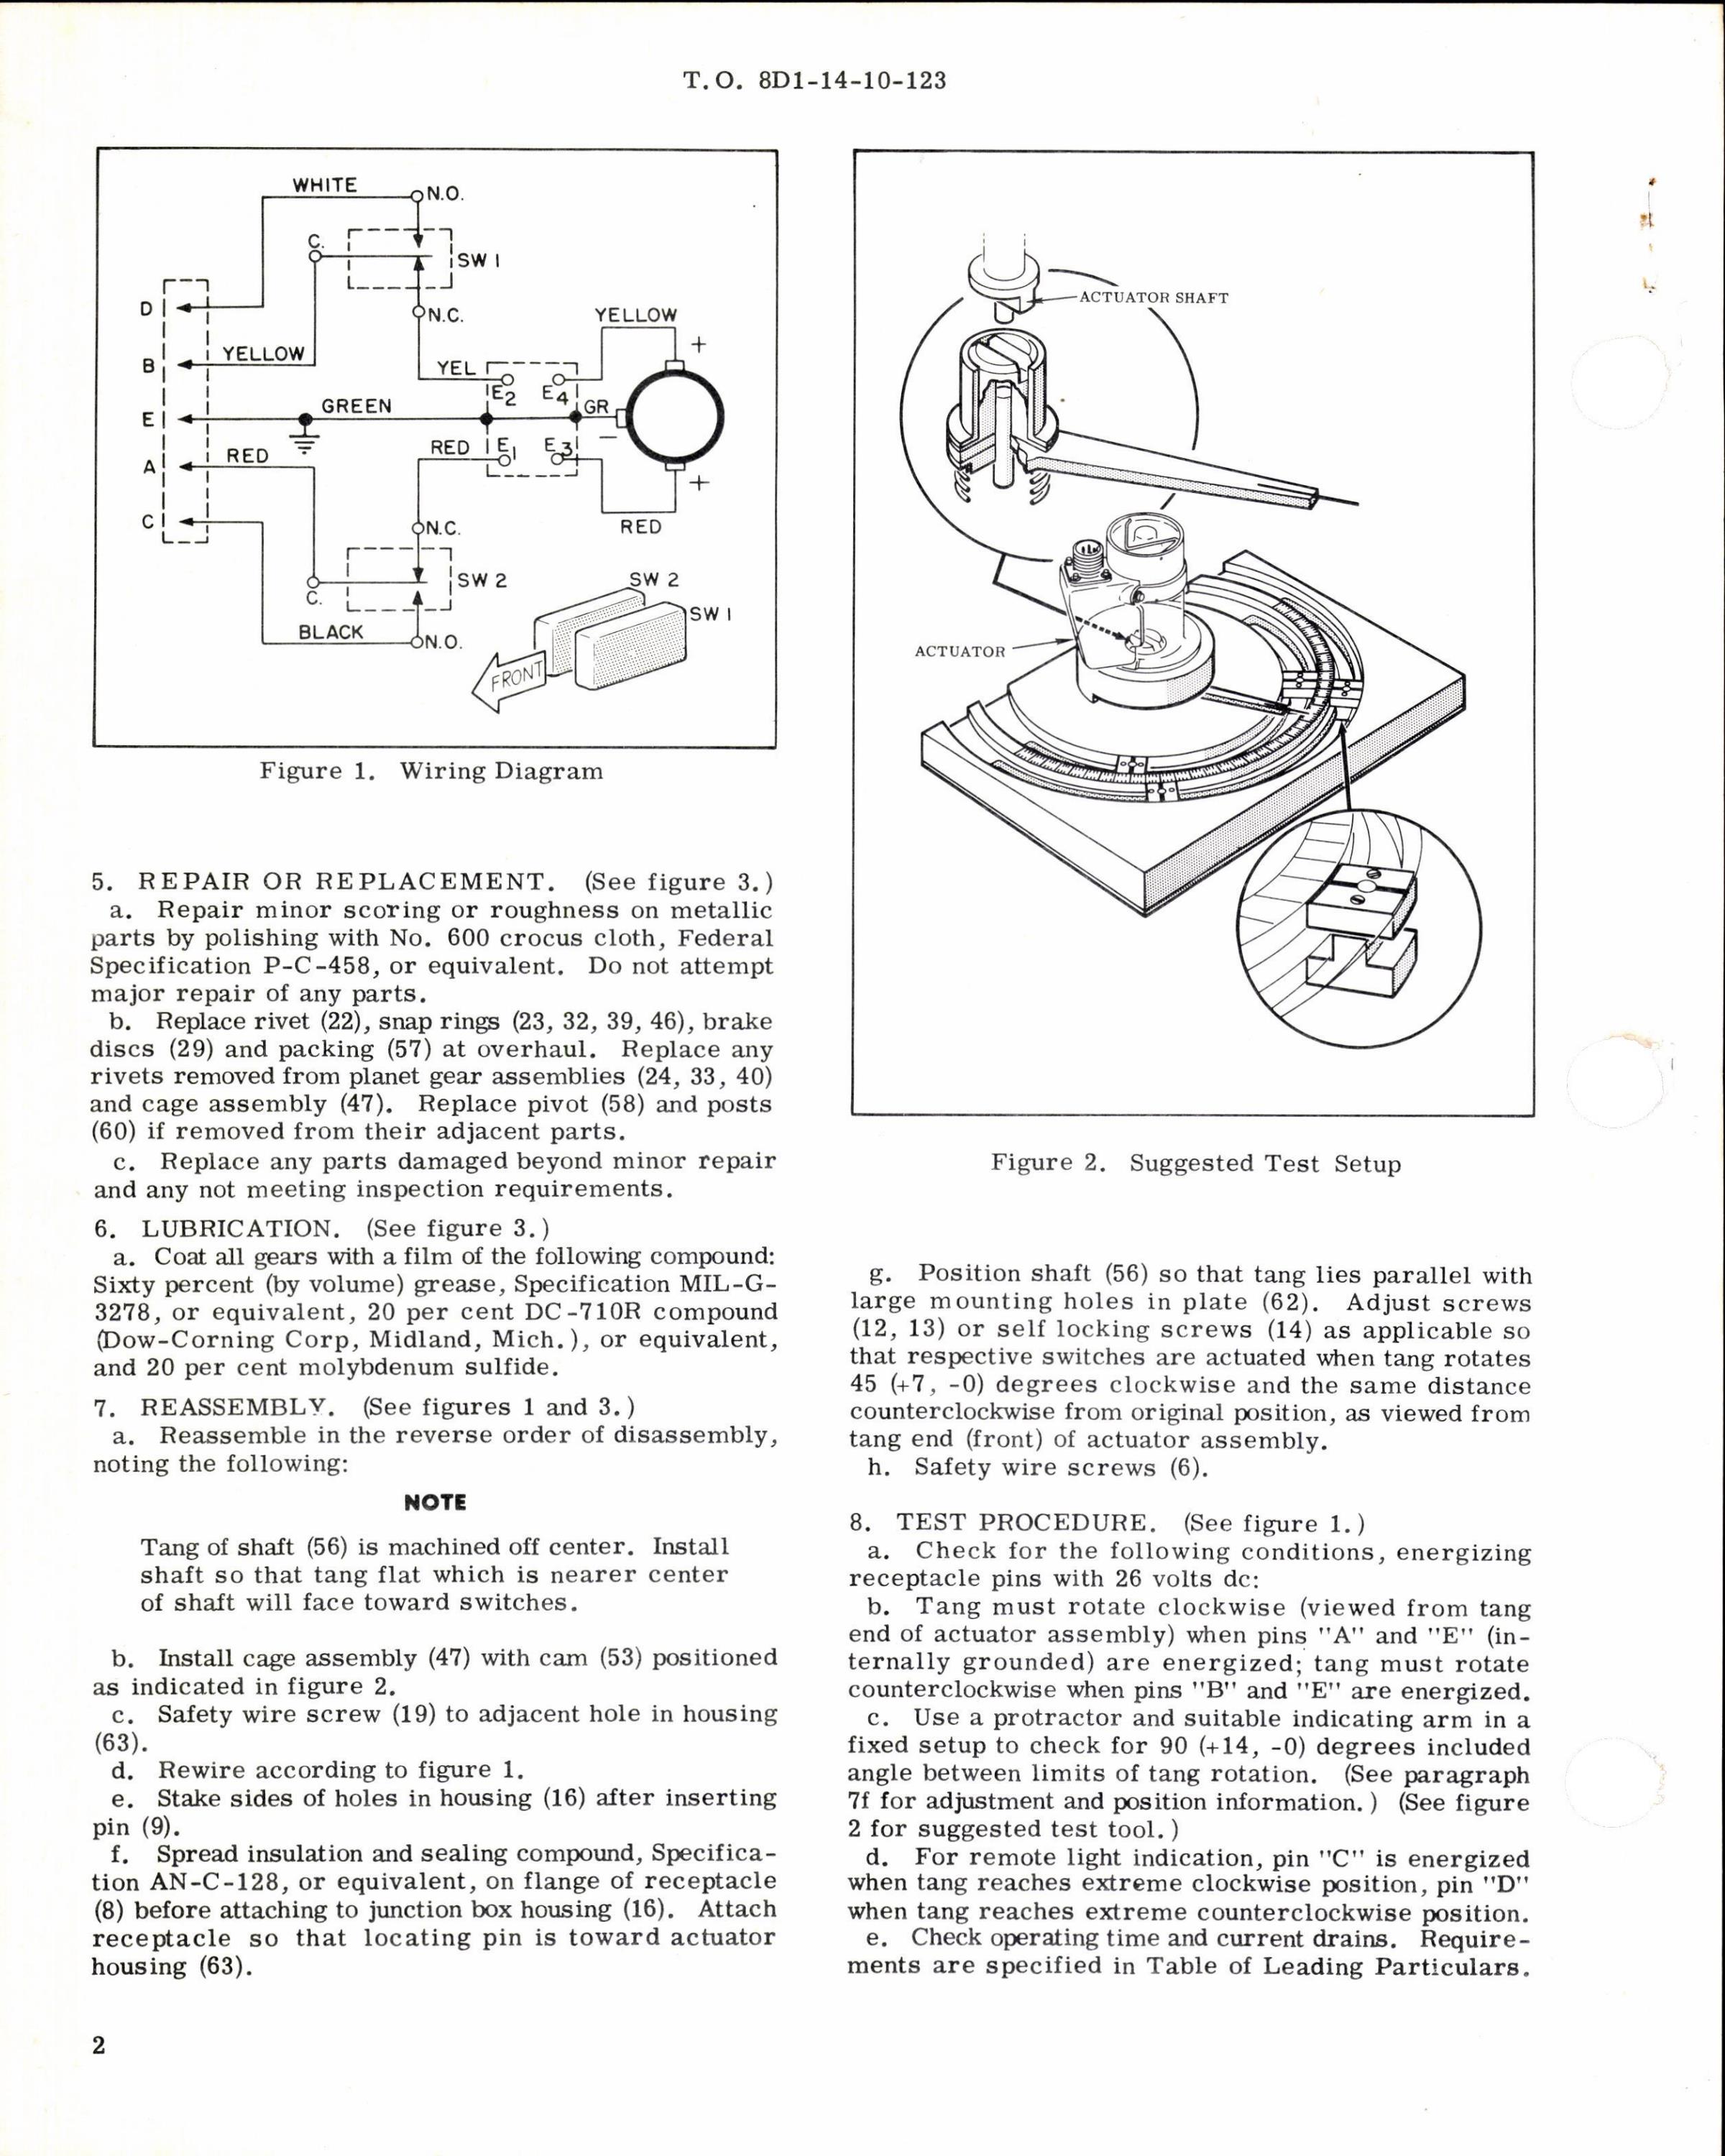 Sample page 2 from AirCorps Library document: Instructions w Parts Breakdown for Actuator Assembly Part 106510